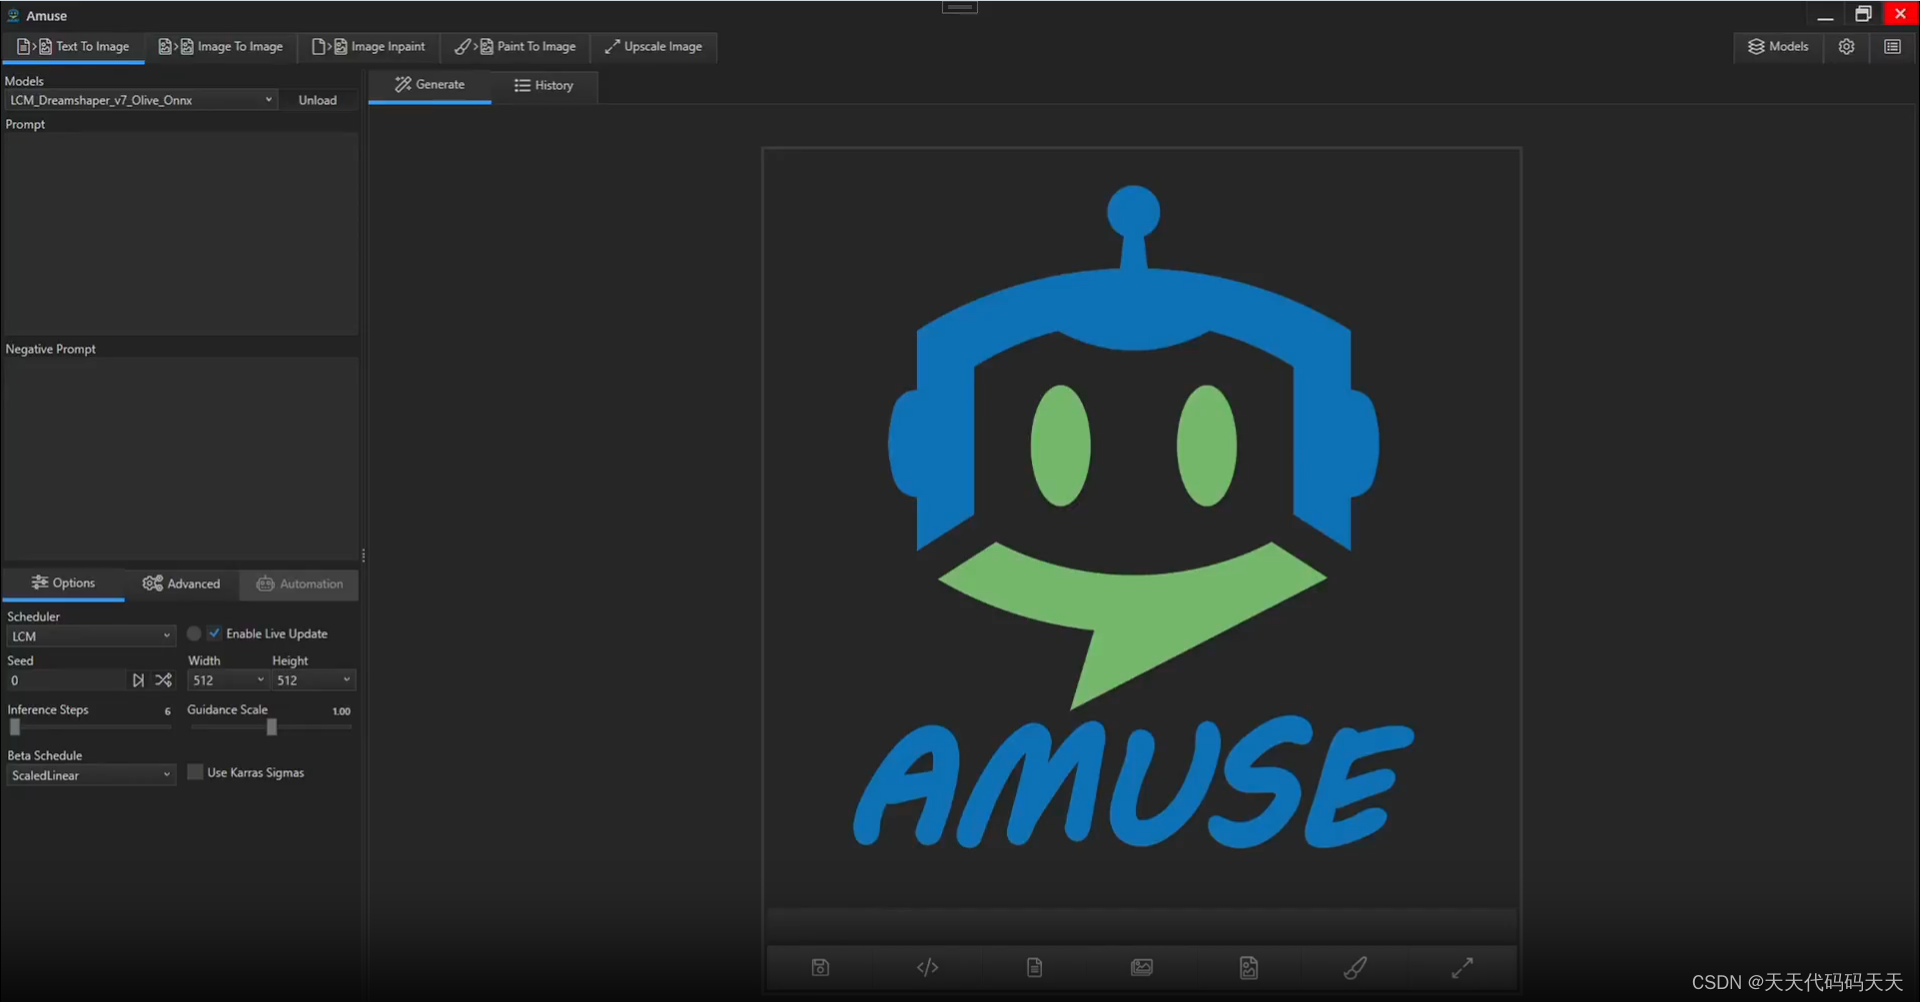 Amuse：.NET application for stable diffusion